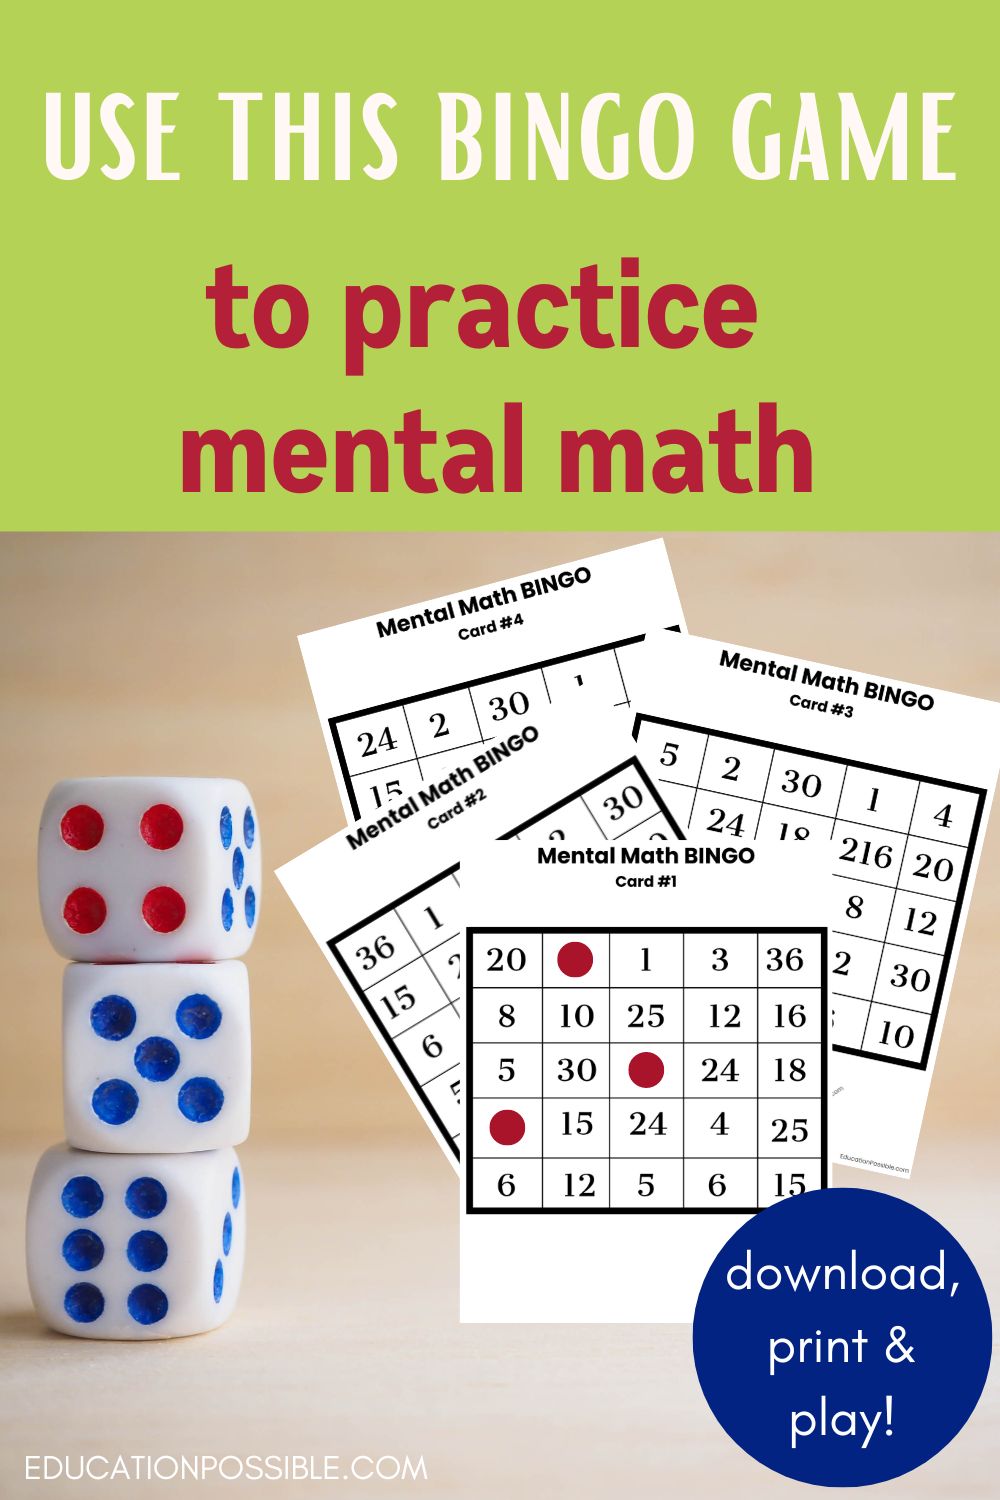 Printable pages of math bingo game to the right of an image of three dice standing on top of one another.